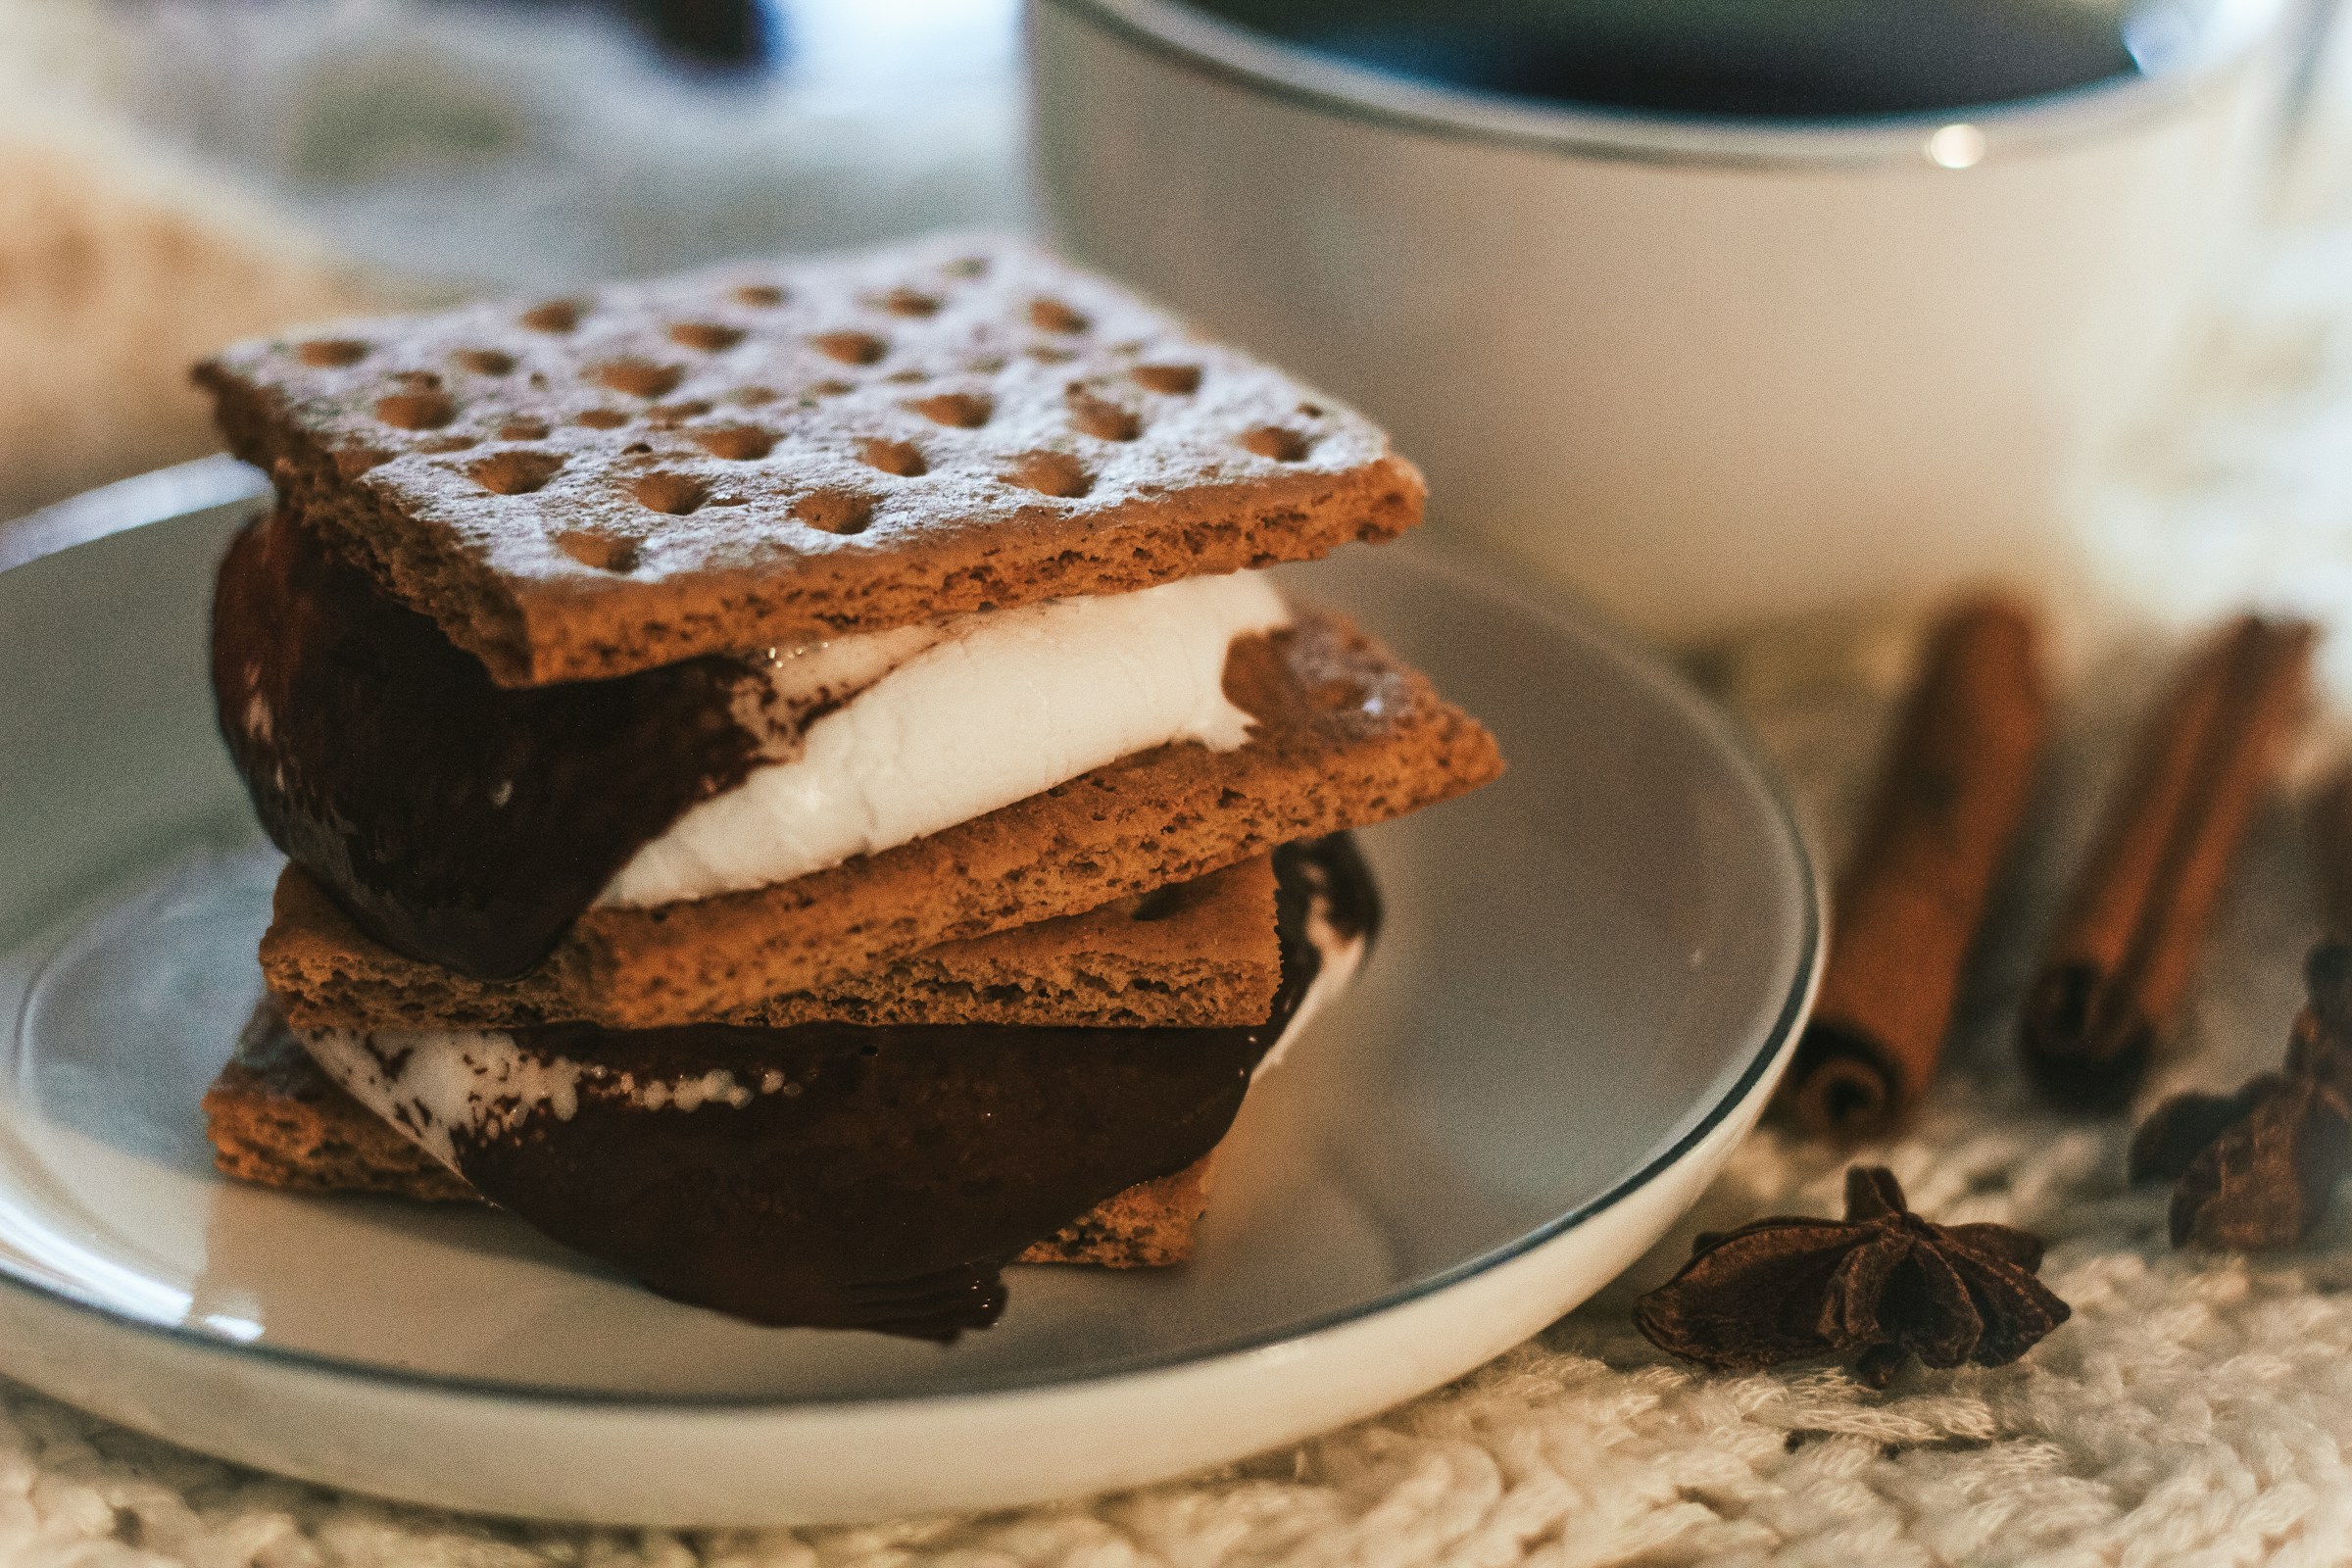 S'mores on a plate | Source: Unsplash